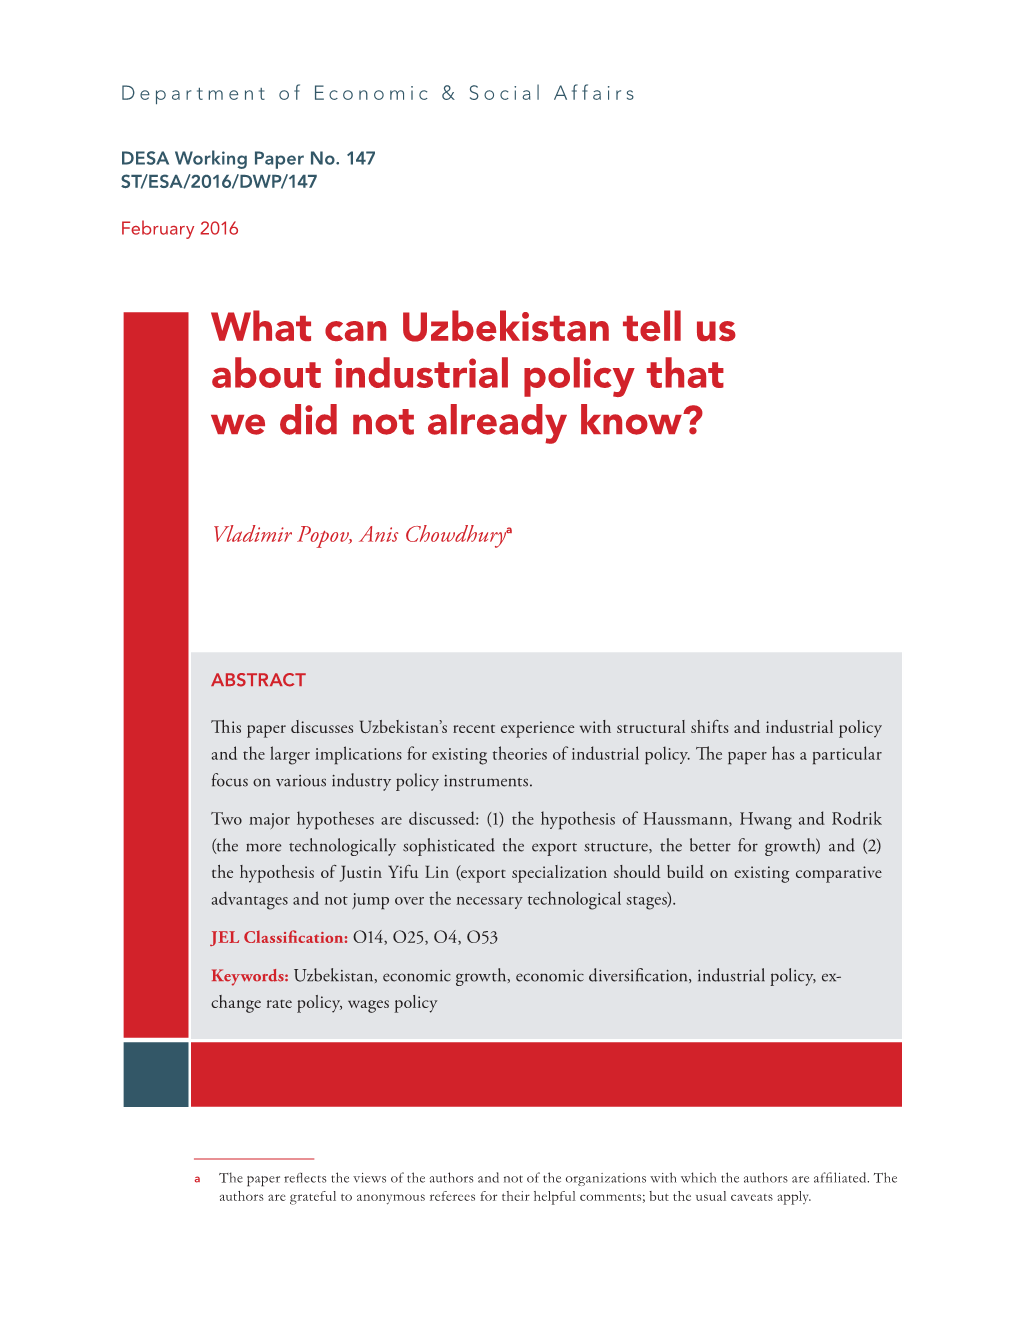 What Can Uzbekistan Tell Us About Industrial Policy That We Did Not Already Know?